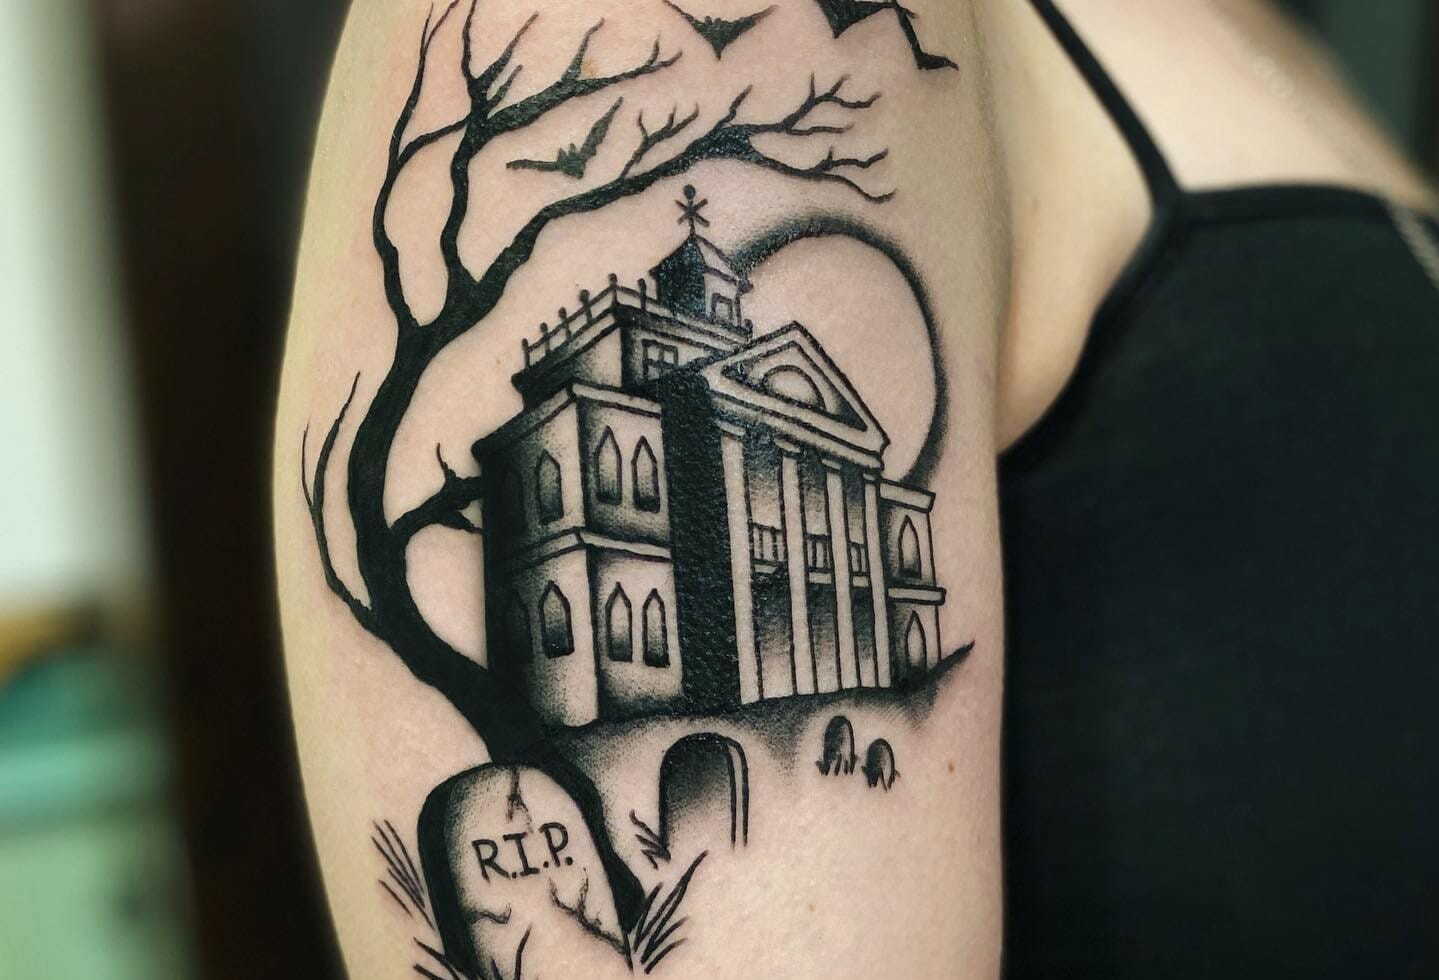 Minimalistic style house and dog paws tattooed on the